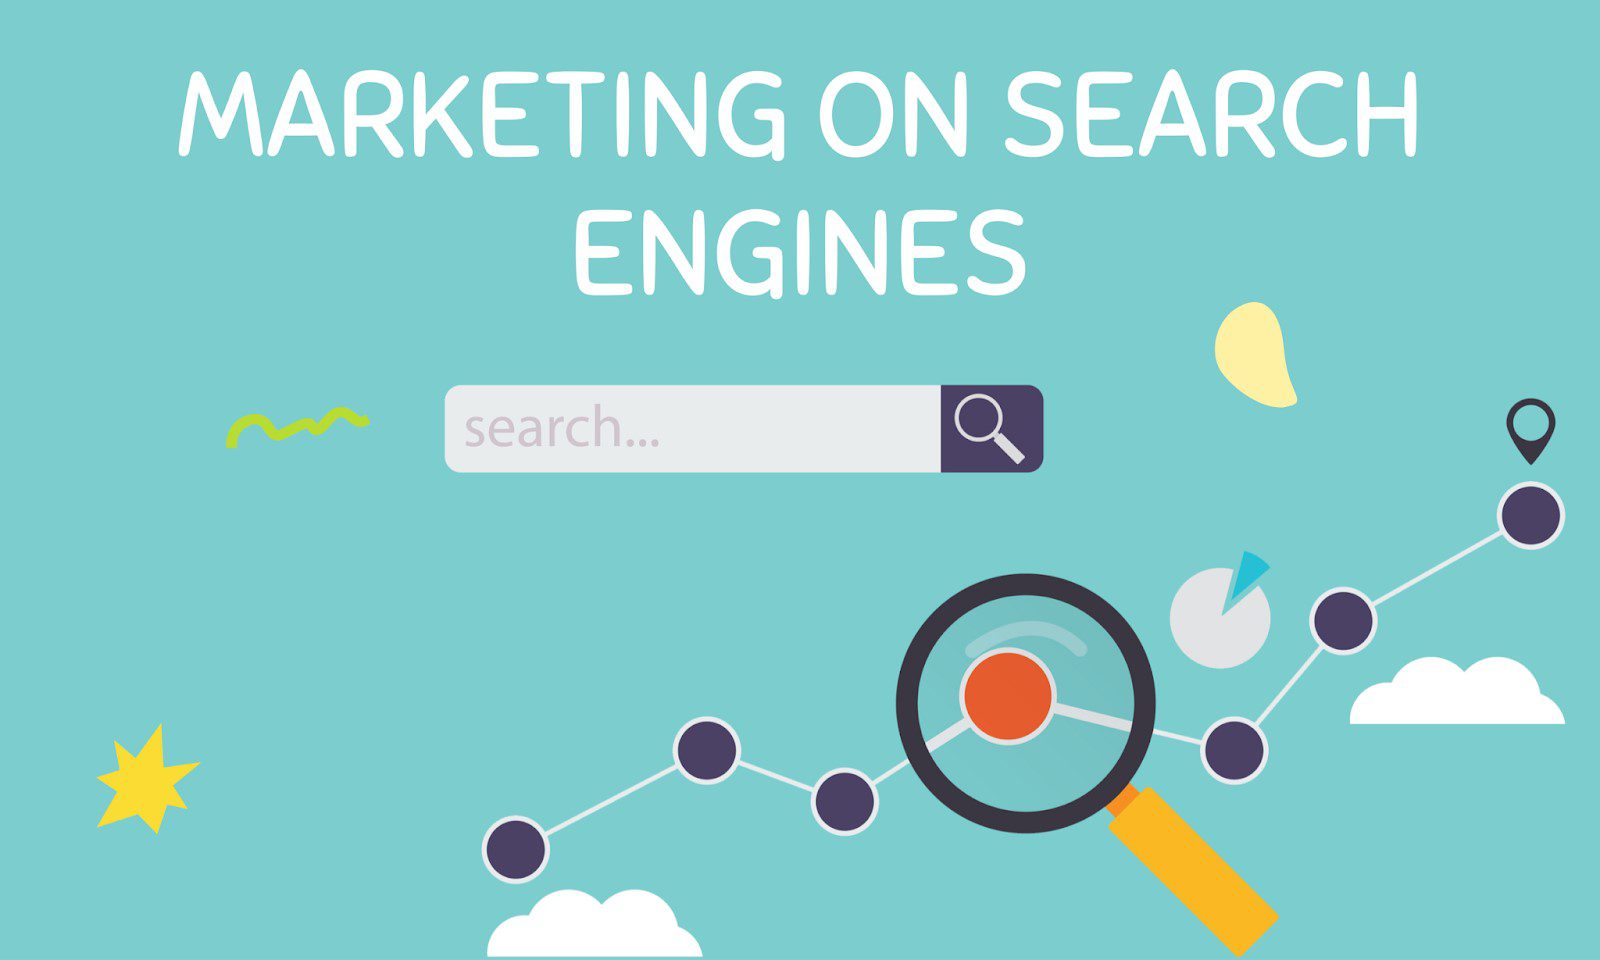 Marketing on search engines